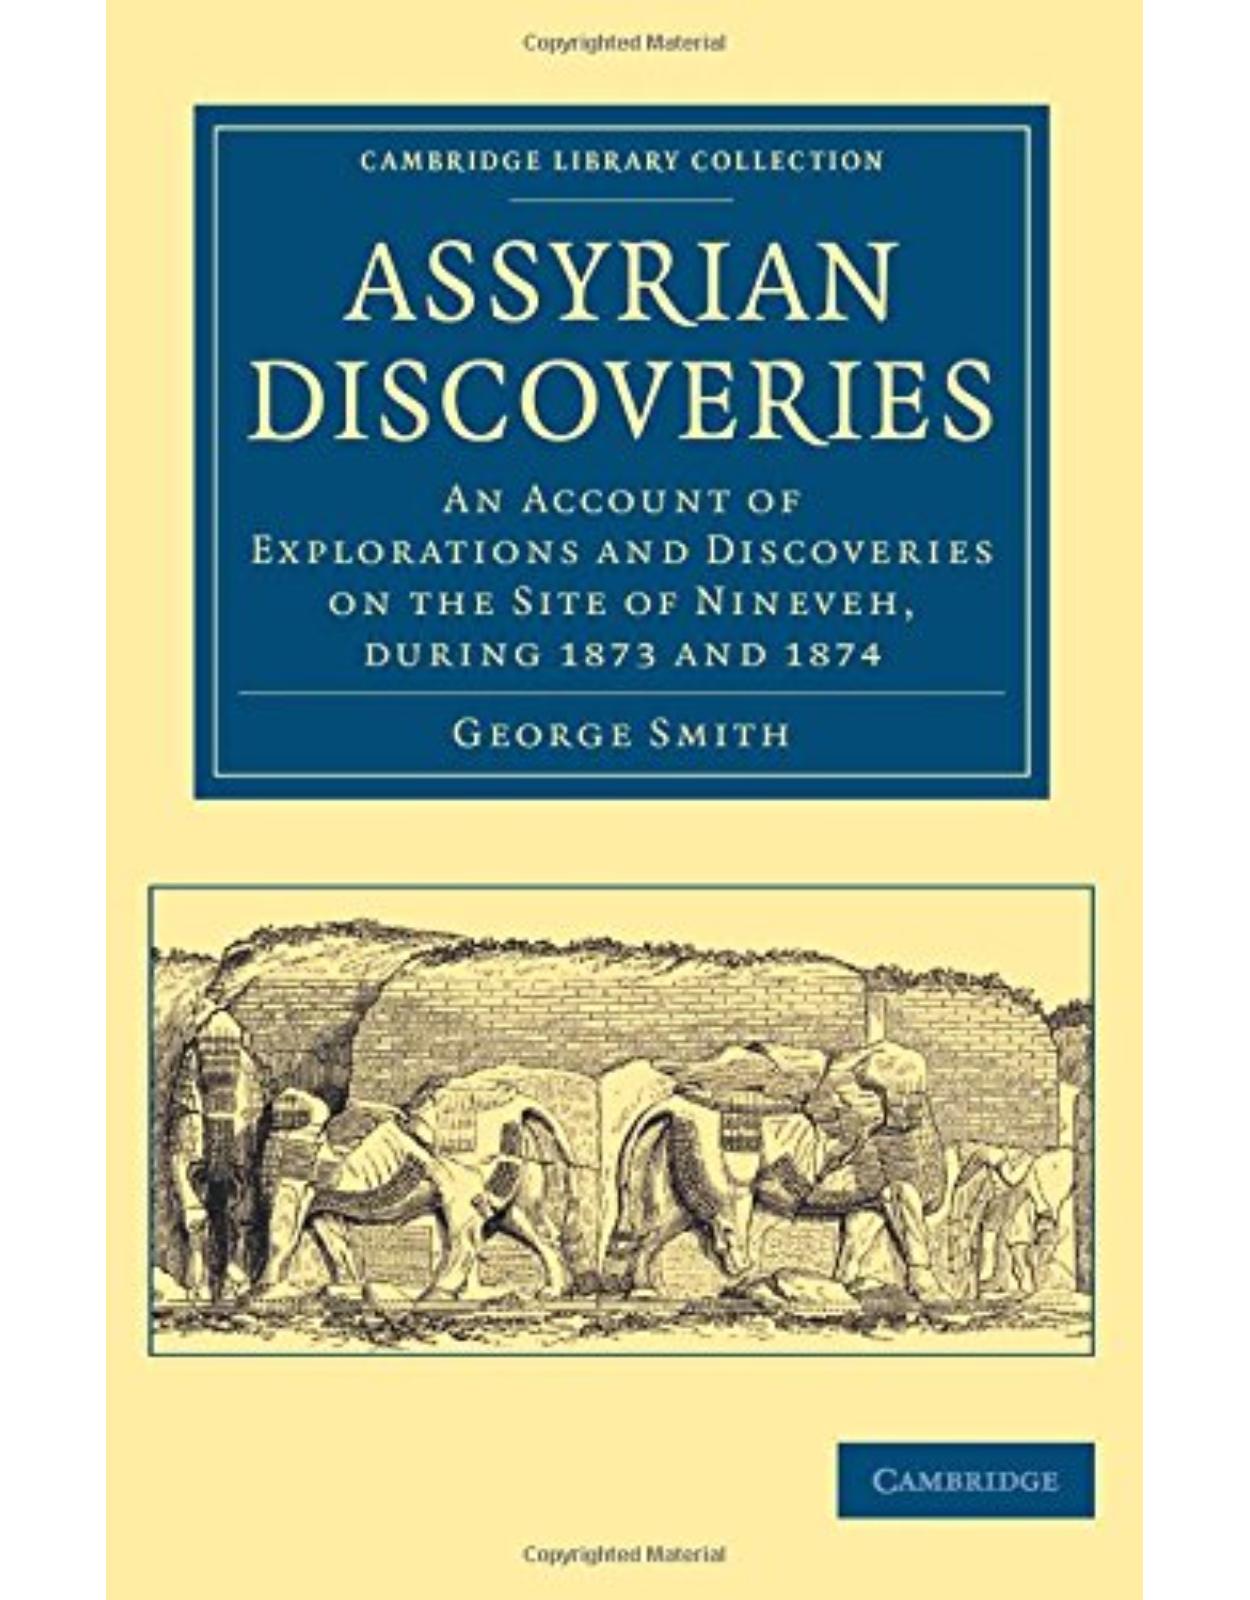 Assyrian Discoveries: An Account of Explorations and Discoveries on the Site of Nineveh, during 1873 and 1874 (Cambridge Library Collection - Archaeology)